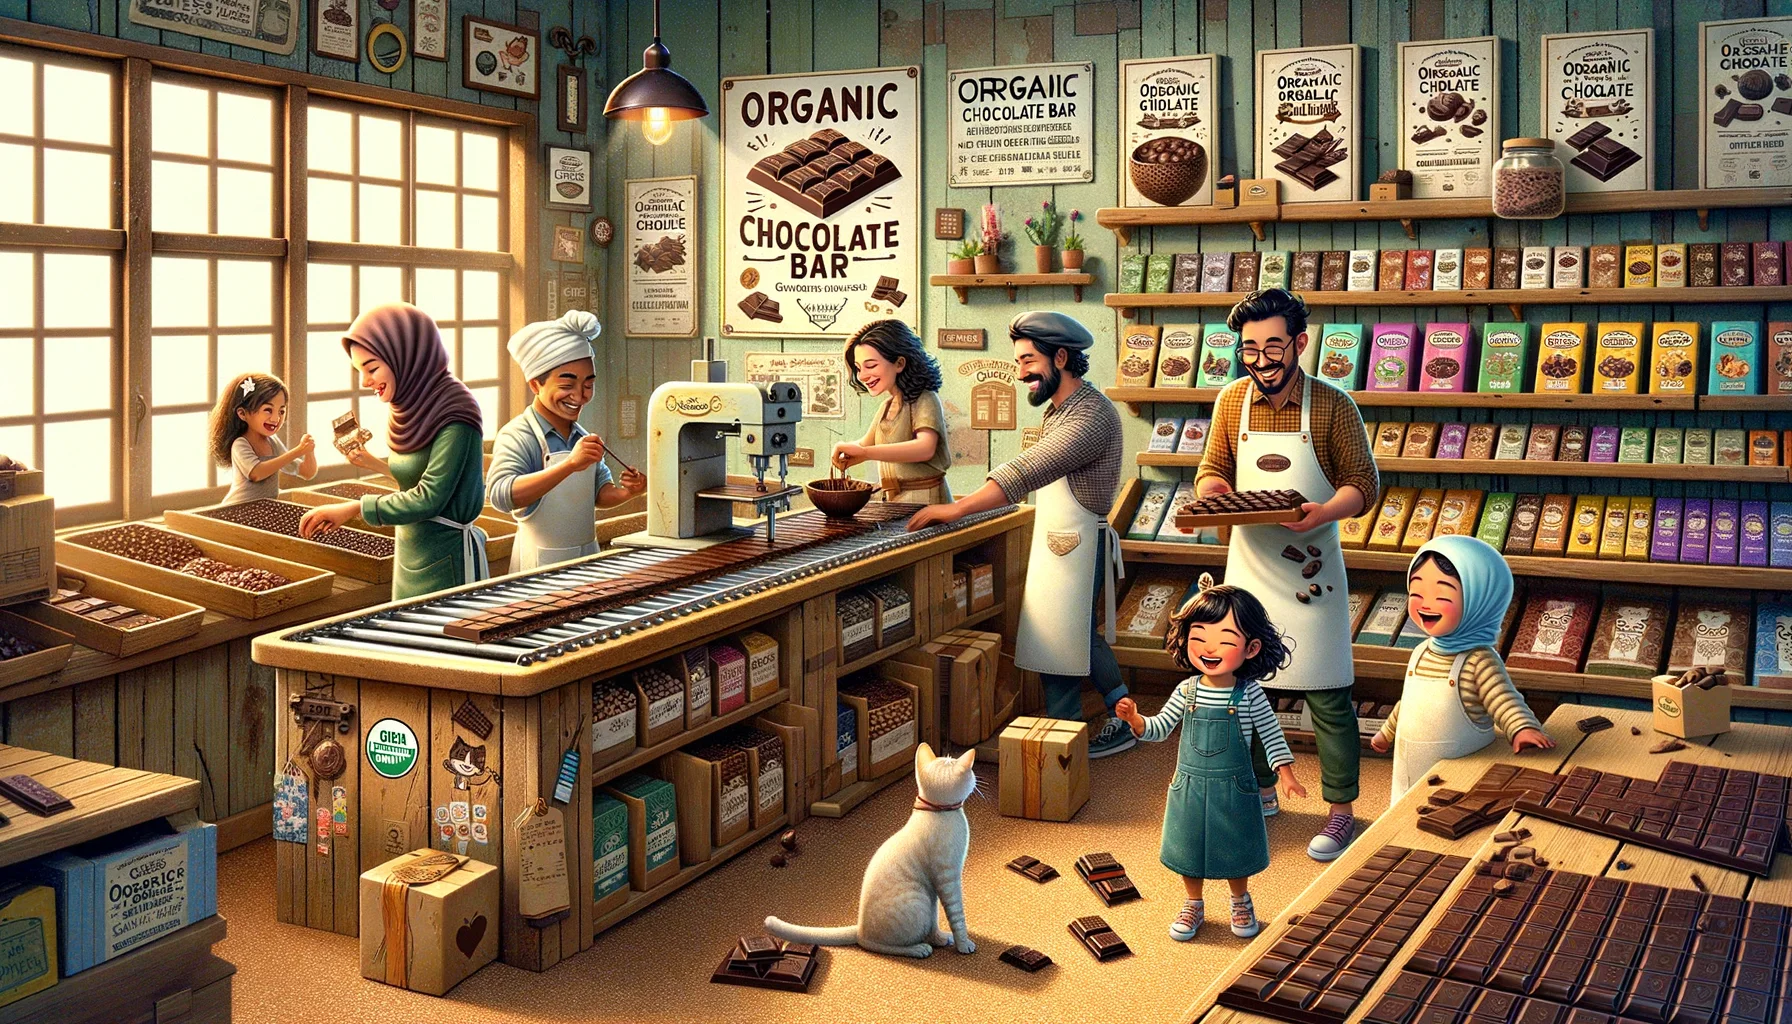 Imagine a quirky, lighthearted scene at an organic chocolate bar shop. A charm-filled space brimming with rustic wooden shelves lined with all sorts of organic chocolate bars in enchanting packaging. There's a chocolate conveyor belt where you can see the chocolate bars being delicately handcrafted by an Asian female chocolatier and a Hispanic male chocolatier, immersed in their work, smiling, wearing aprons splattered with sweet cocoa. A Middle-Eastern family with kids are joyously selecting chocolate bars, their eyes filled with wonder, while a South Asian couple is contemplating the varieties. A cat playfully bats at a chocolate bar wrapper on the sound-softening cork floor. Whimsical, vintage-style posters in the background advertise the delights of organic chocolate.